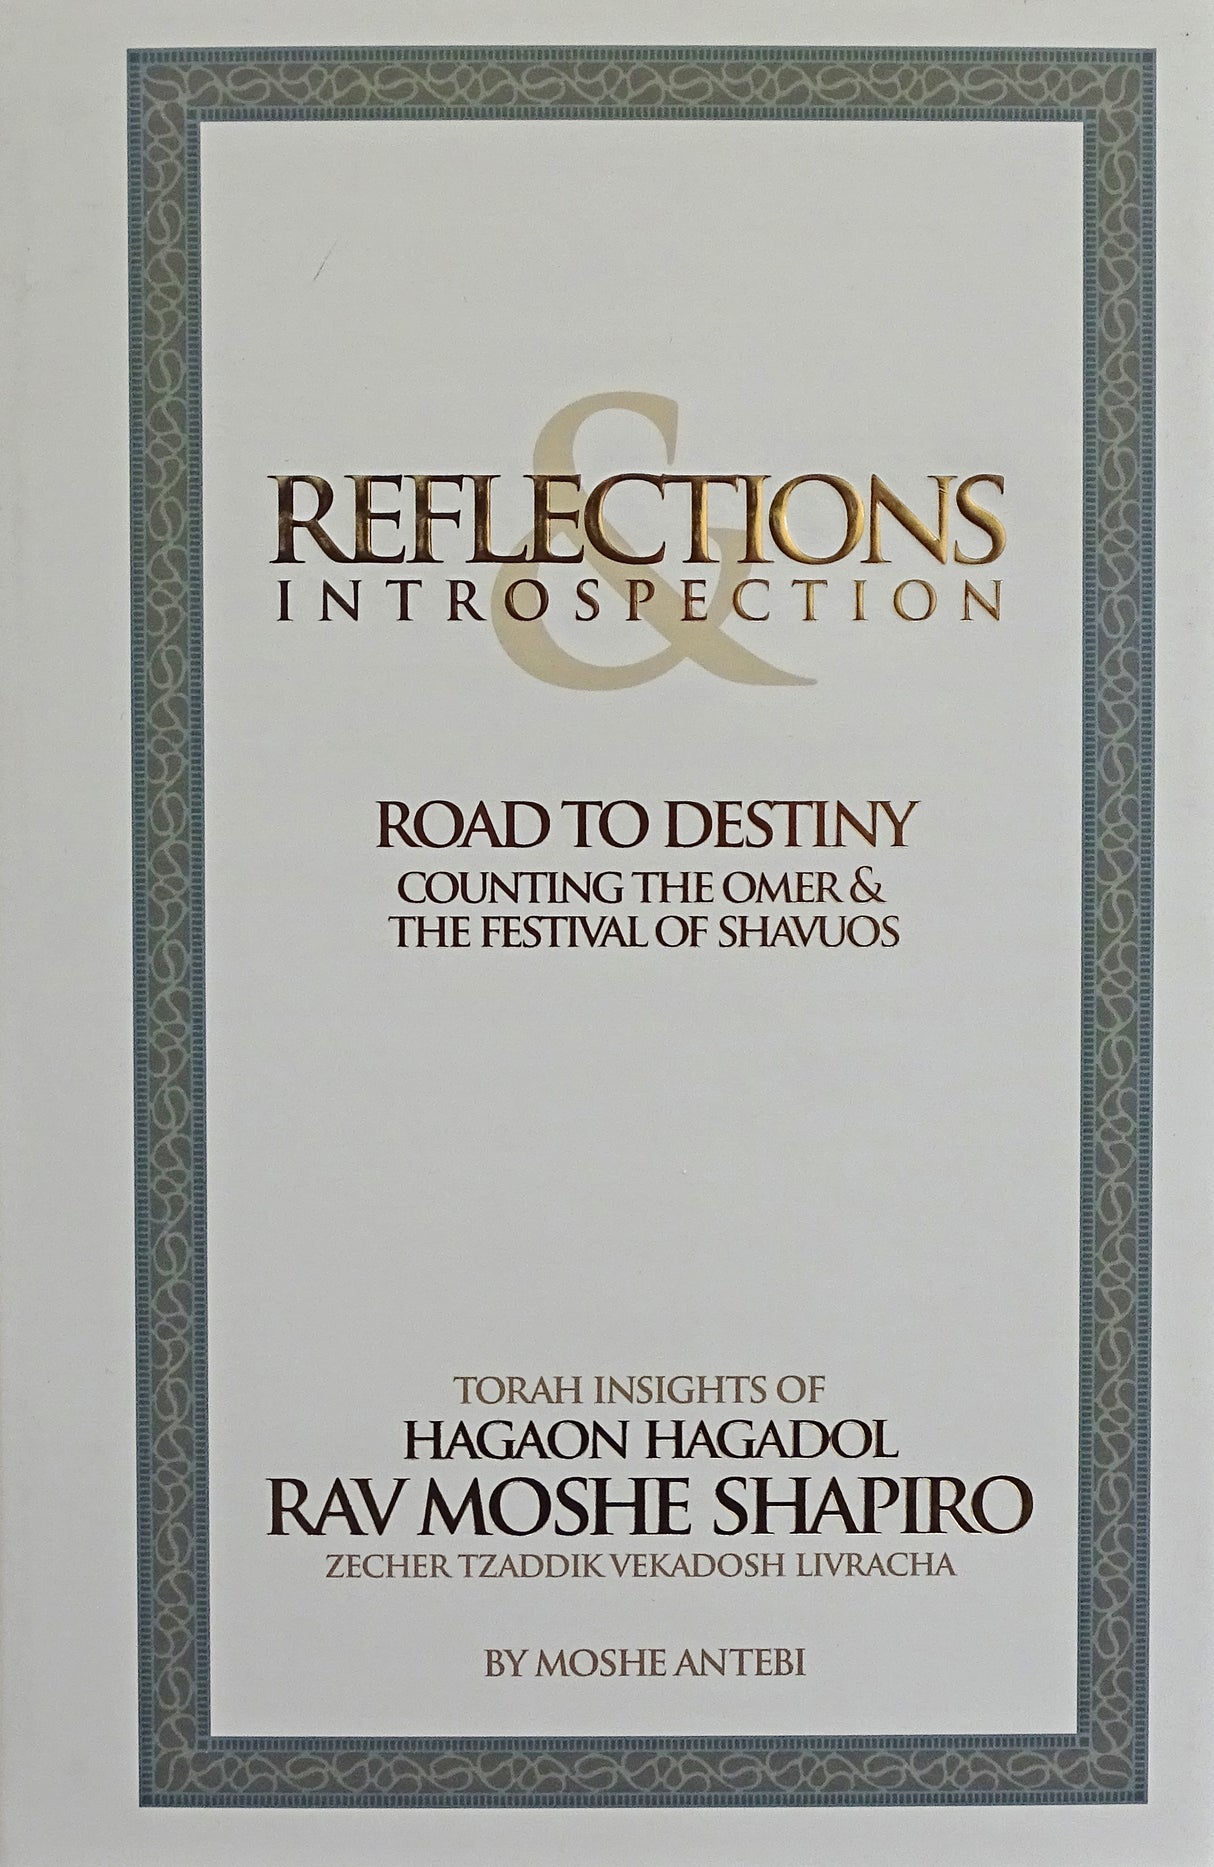 Reflections & Introspection Road to Destiny Counting the Omer & The Festival of Shavuos